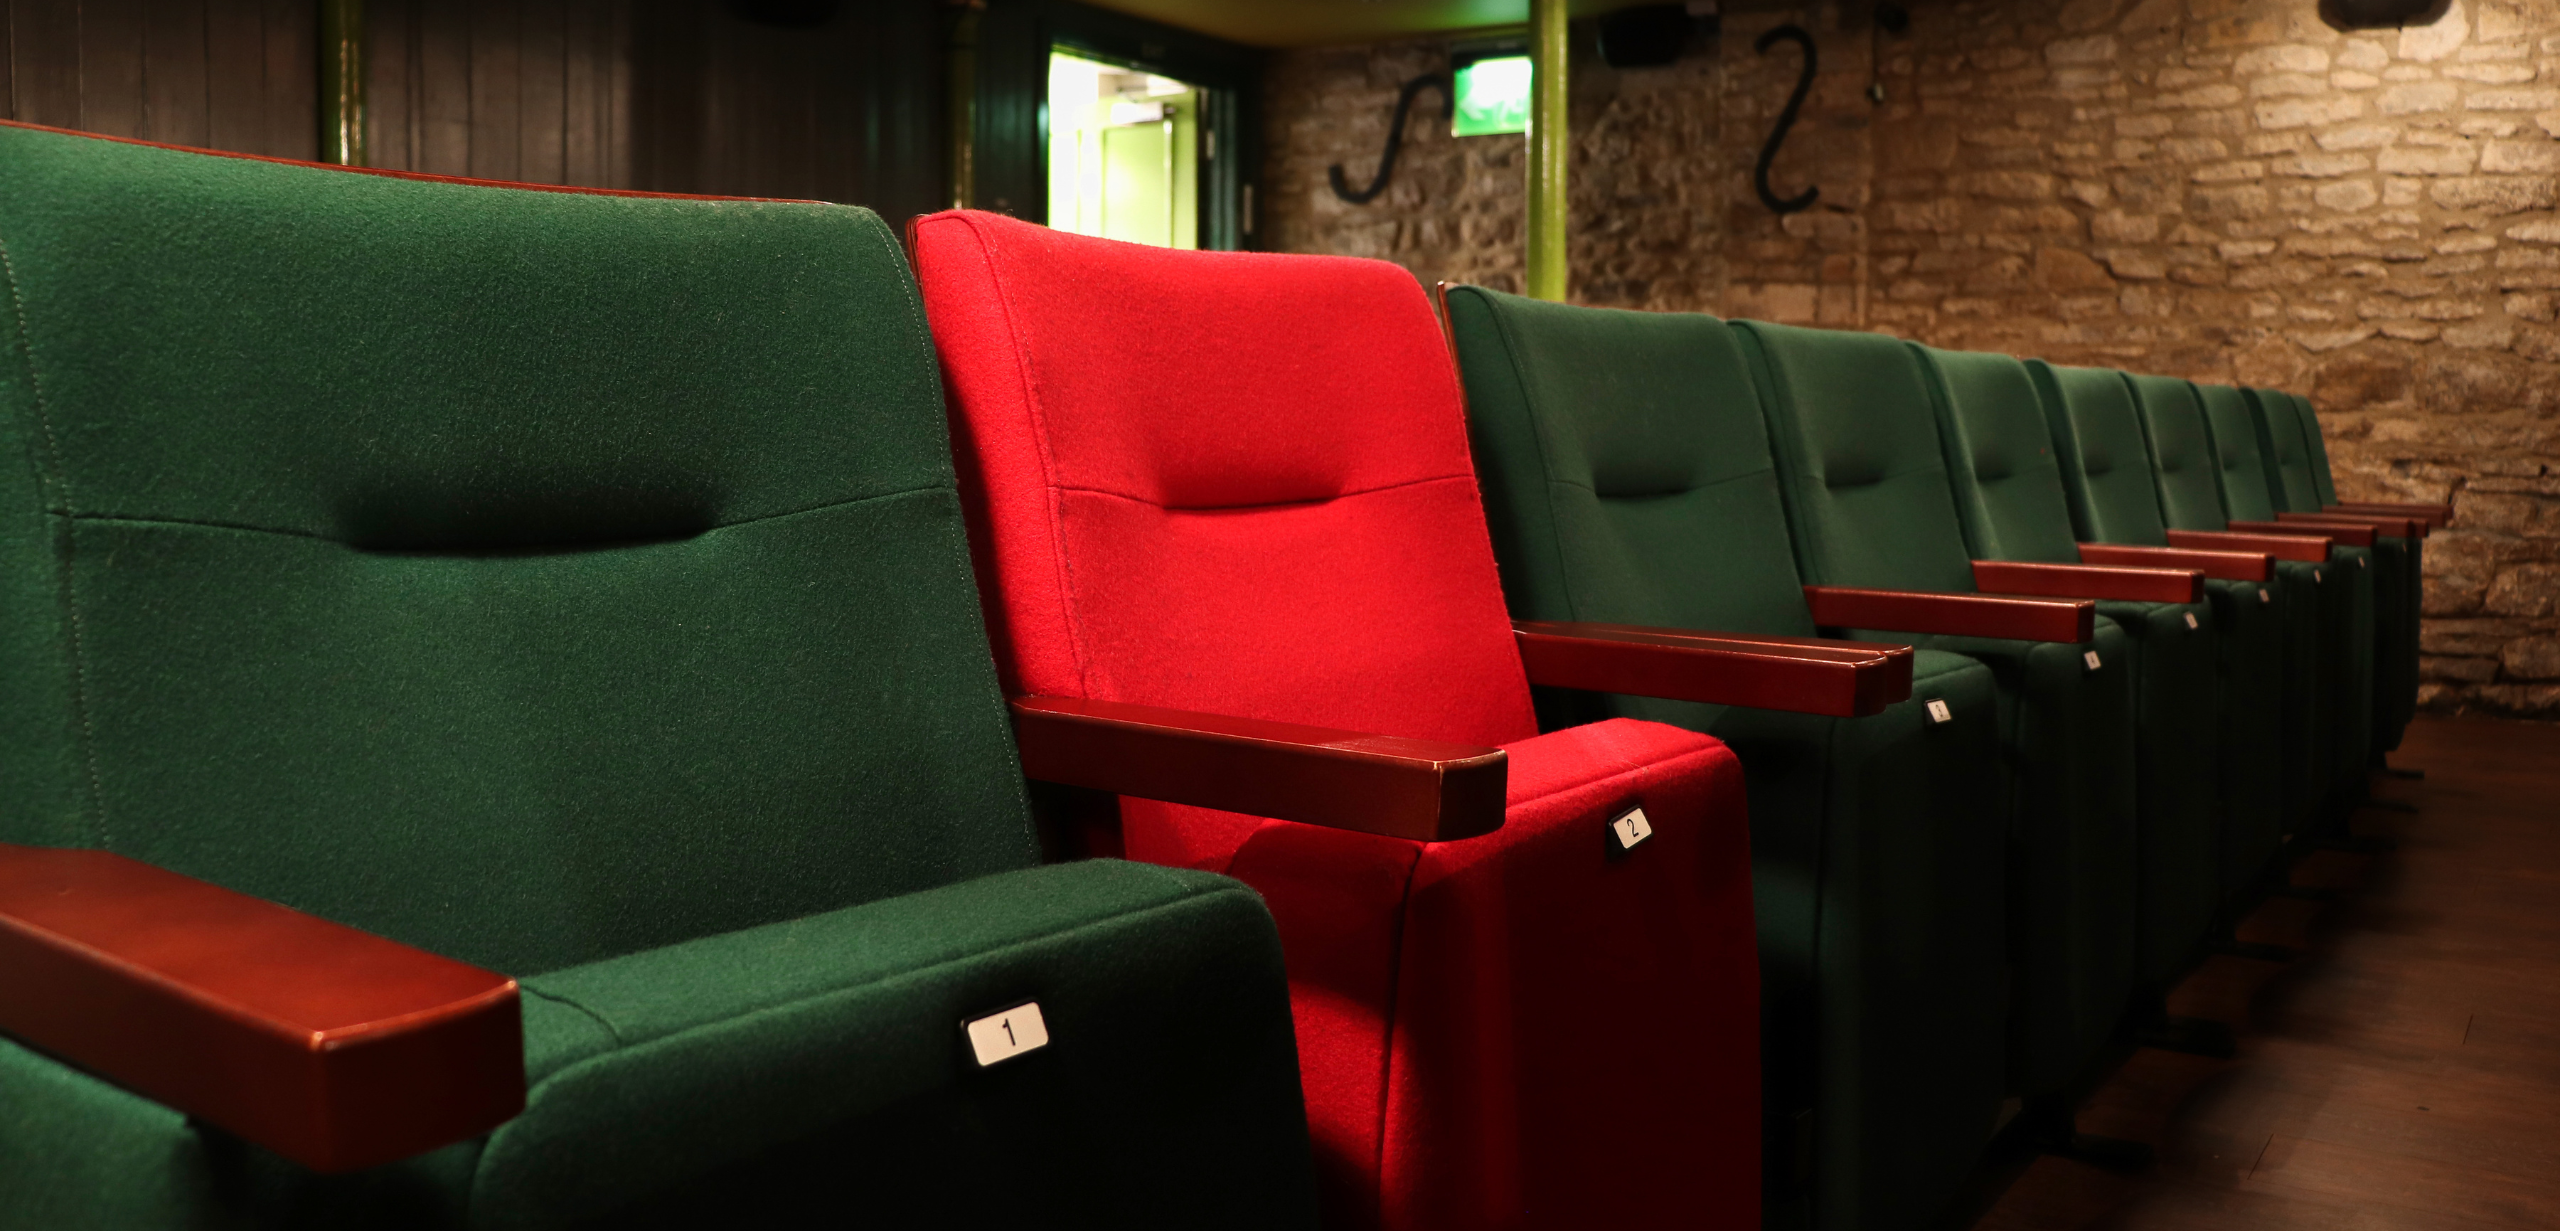 A row of red and green theater style seating.